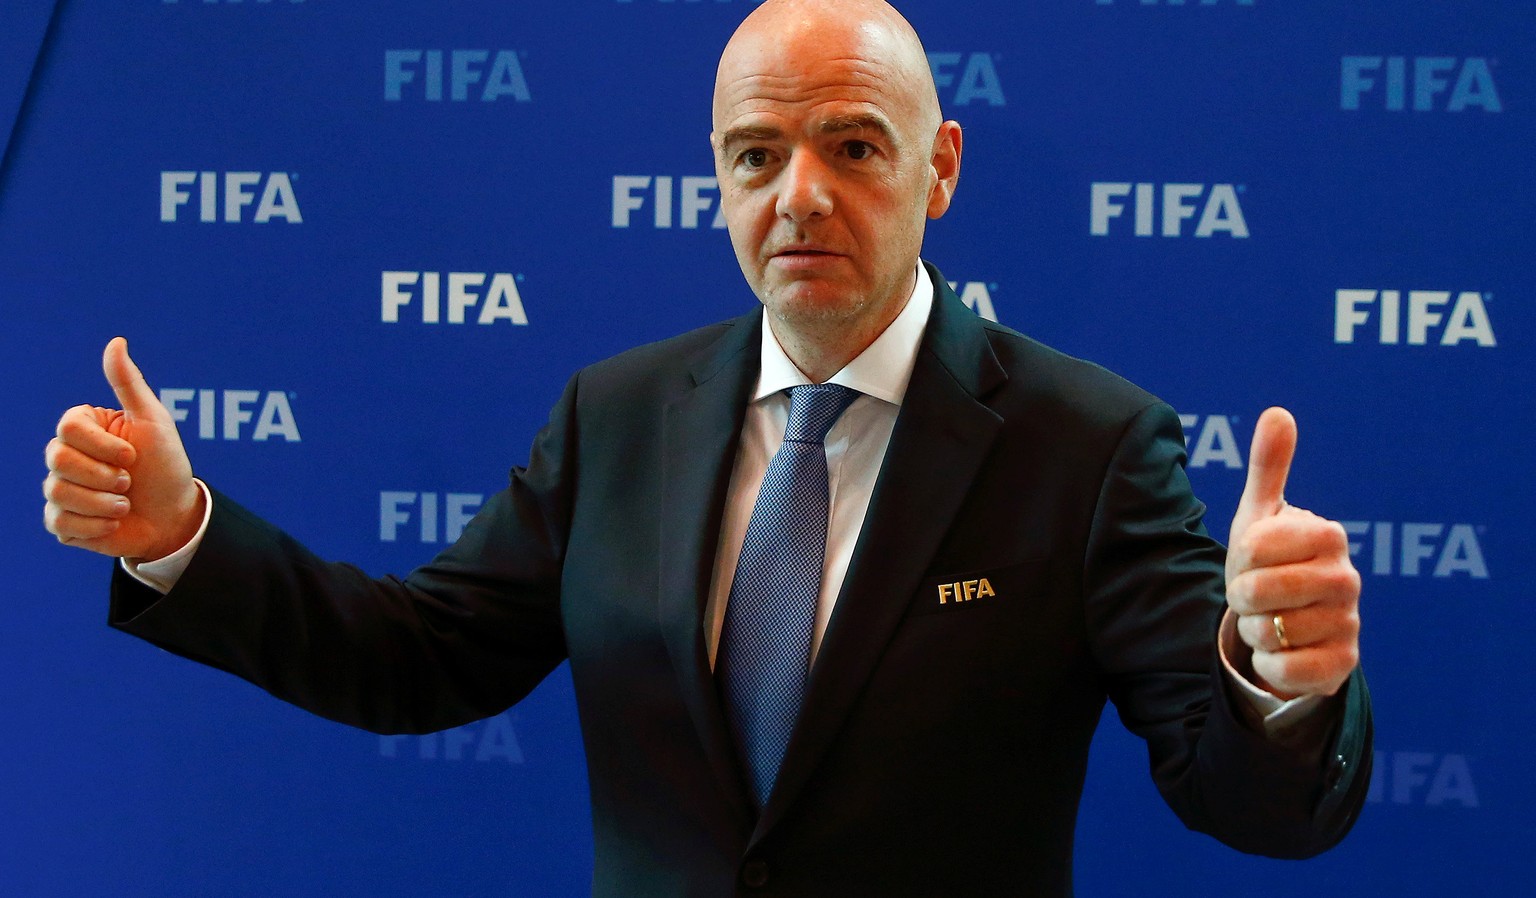 FIFA President Gianni Infantino gestures after a meeting of the FIFA Council at the FIFA headquarters in Zurich, Switzerland October 14, 2016. REUTERS/Arnd Wiegmann